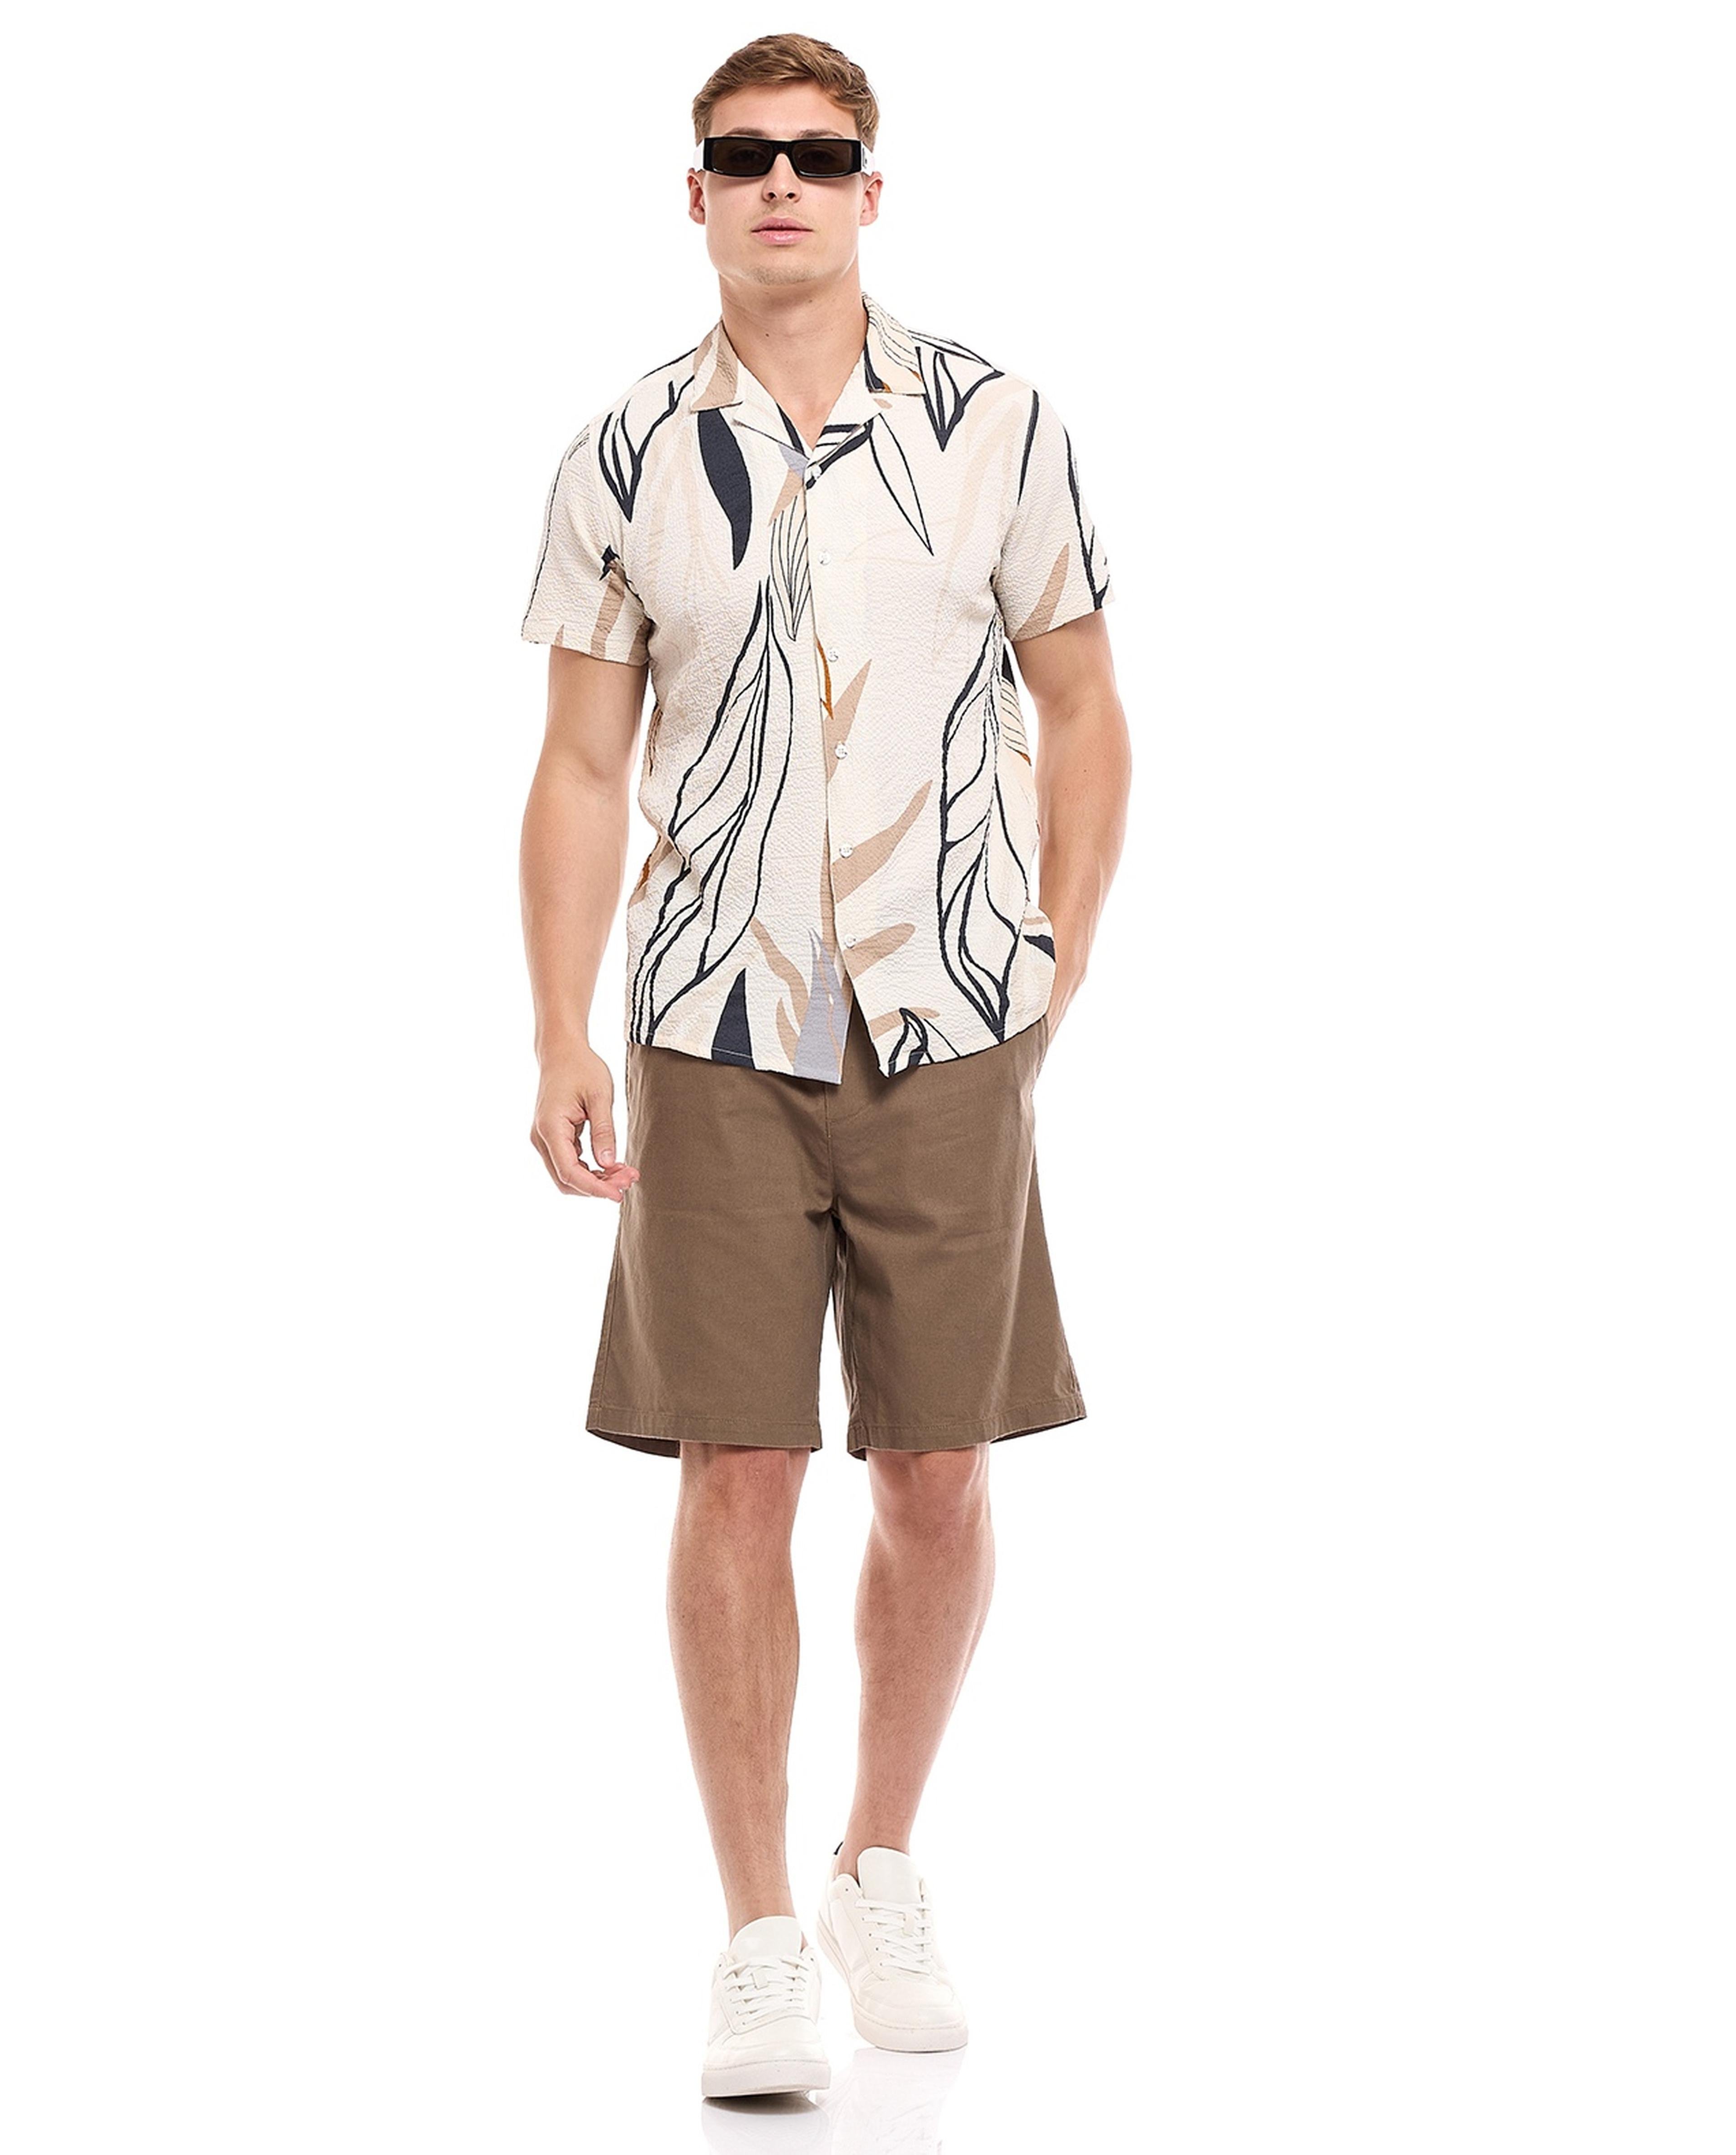 Patterned Shirt with Revere Collar and Short Sleeves